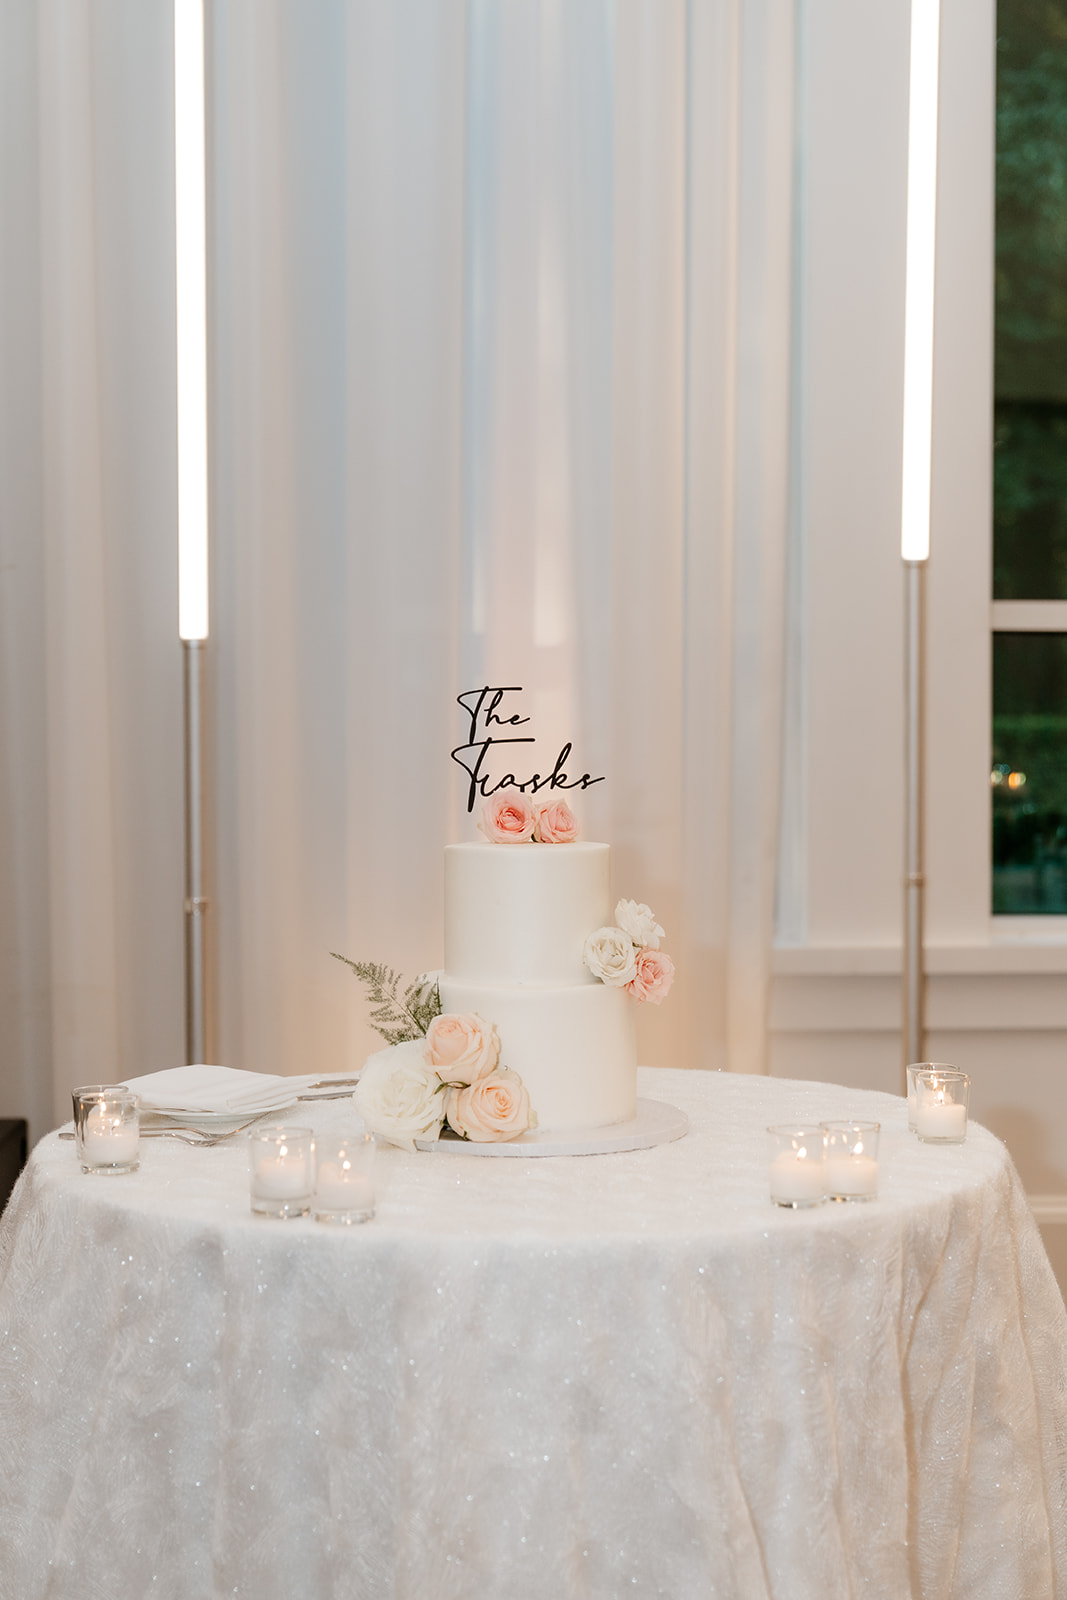 A two-tiered wedding cake with "the trasks" topper, surrounded by lit candles on a table with a sparkly tablecloth, in a room with white curtains and vertical lights.